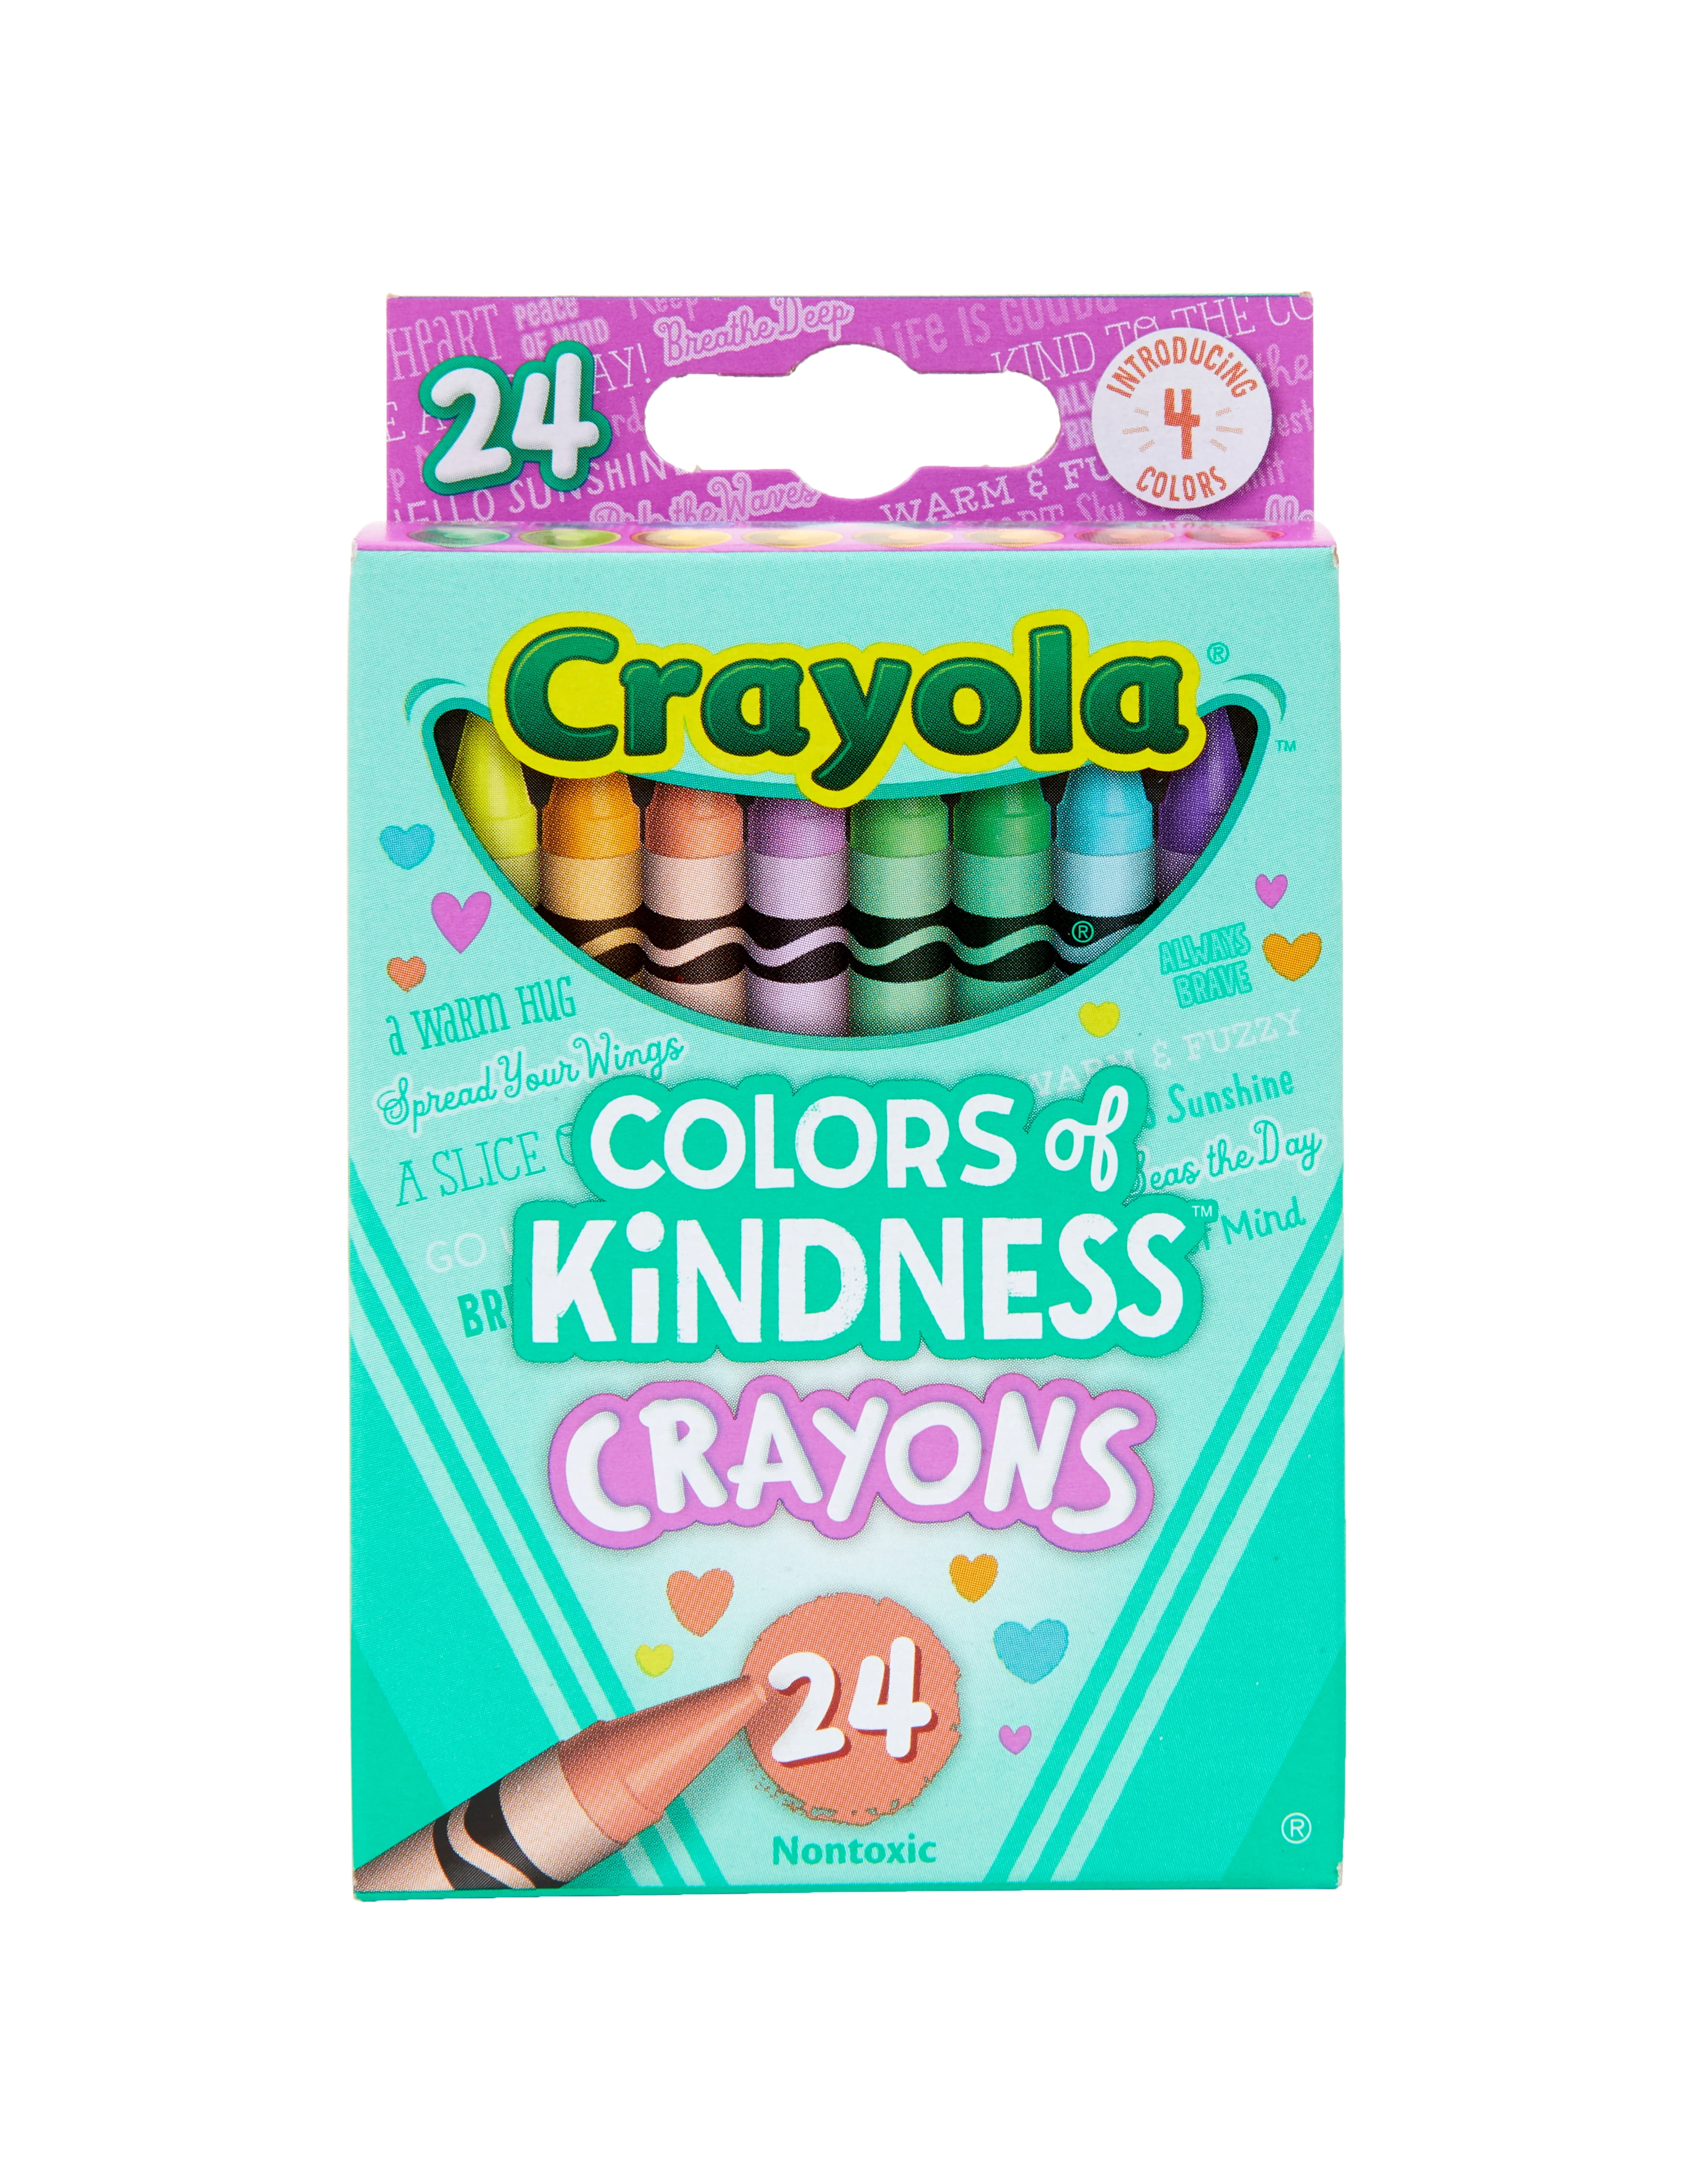 Crayola Colors of Kindness Crayons 24-Pack Brand New Newest 2021 Colors